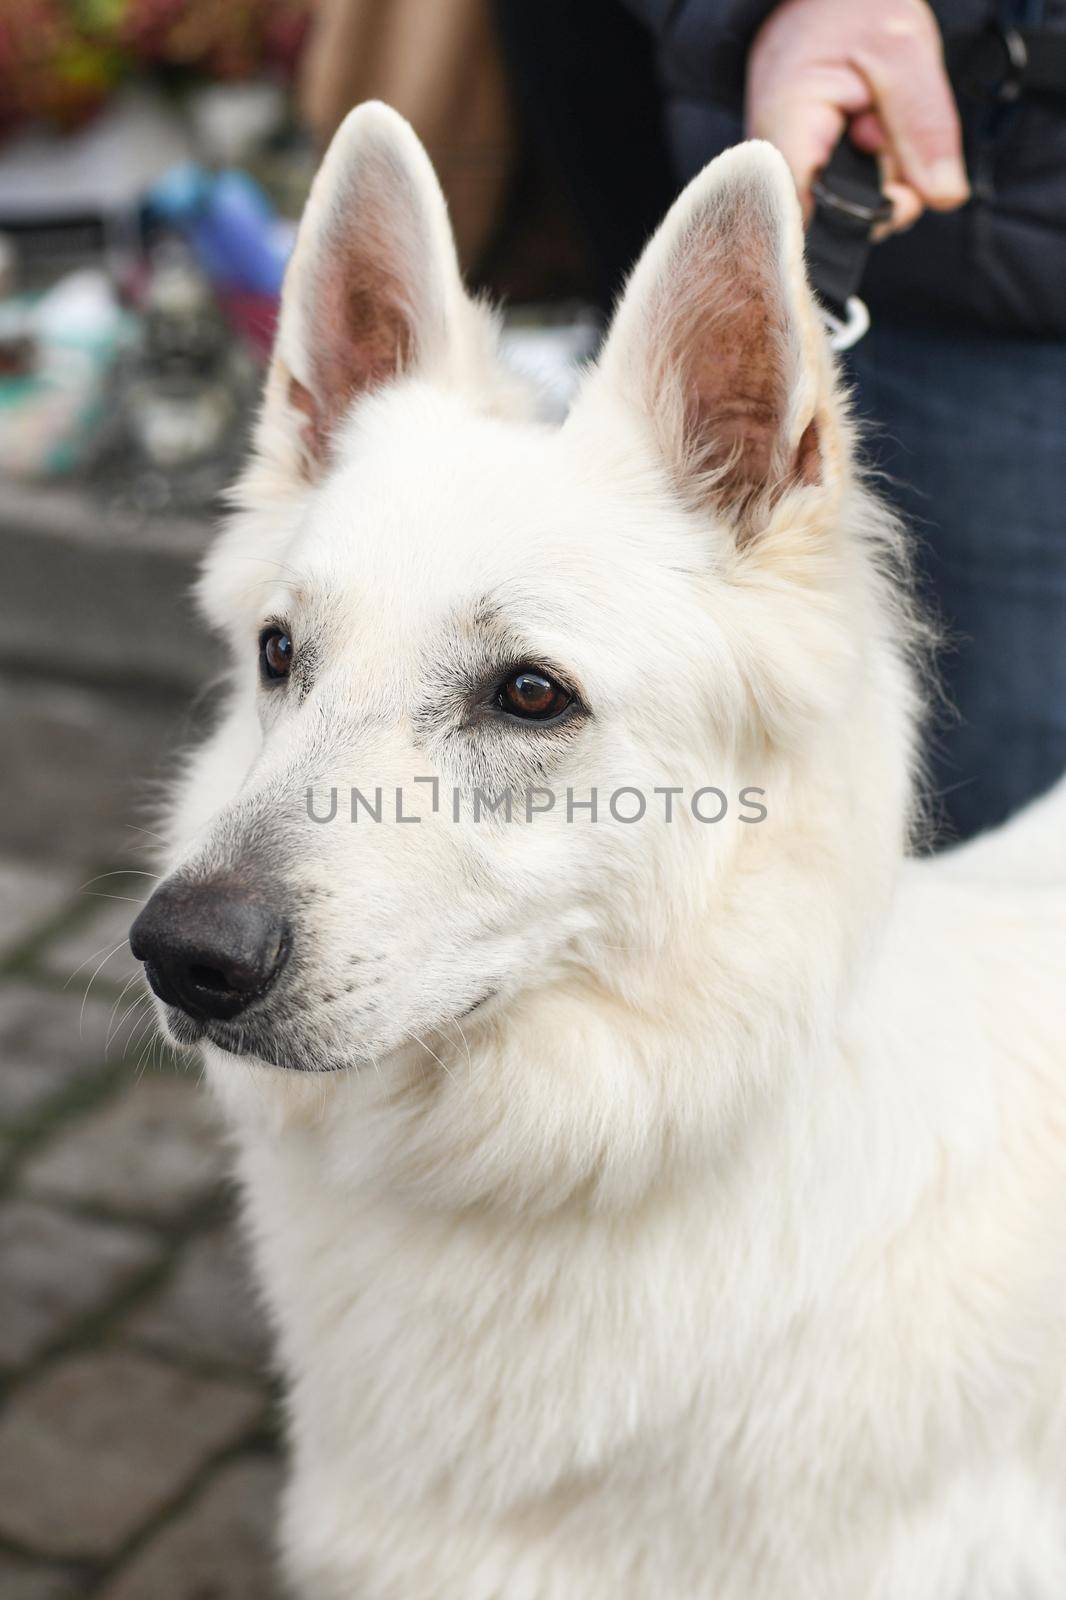 The owner holds on a leash a white Swiss Shepherd Dog Portrait